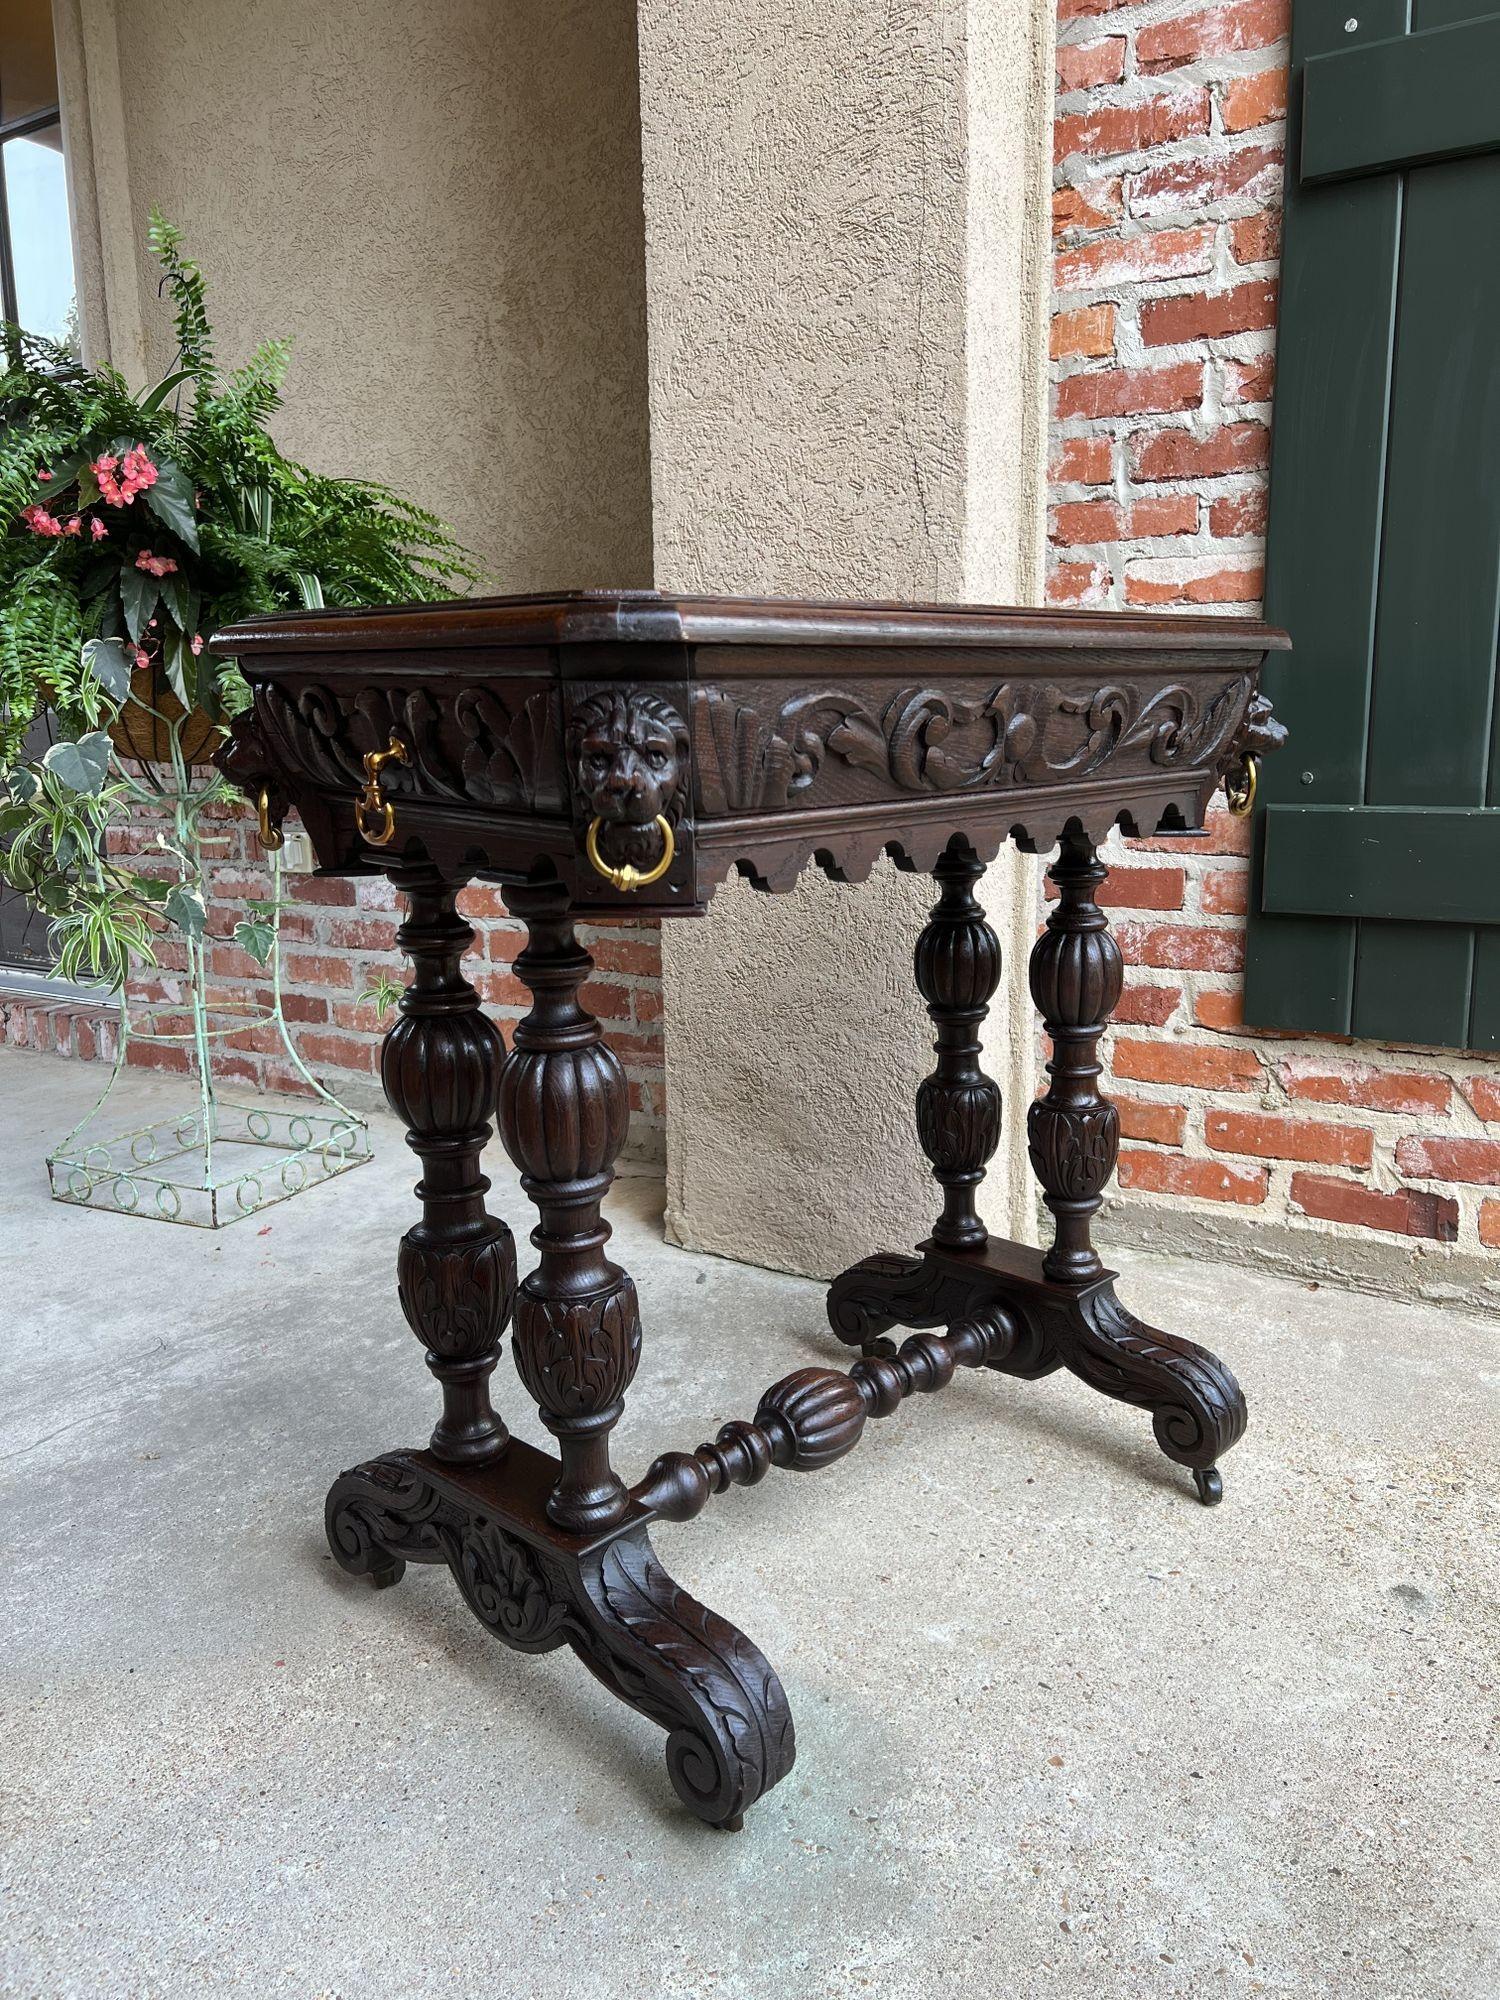 19th century French Carved Oak Dolphin Library Table Petite Desk Renaissance.
 
Direct from France, an elegant, and petite, antique French carved library table or 